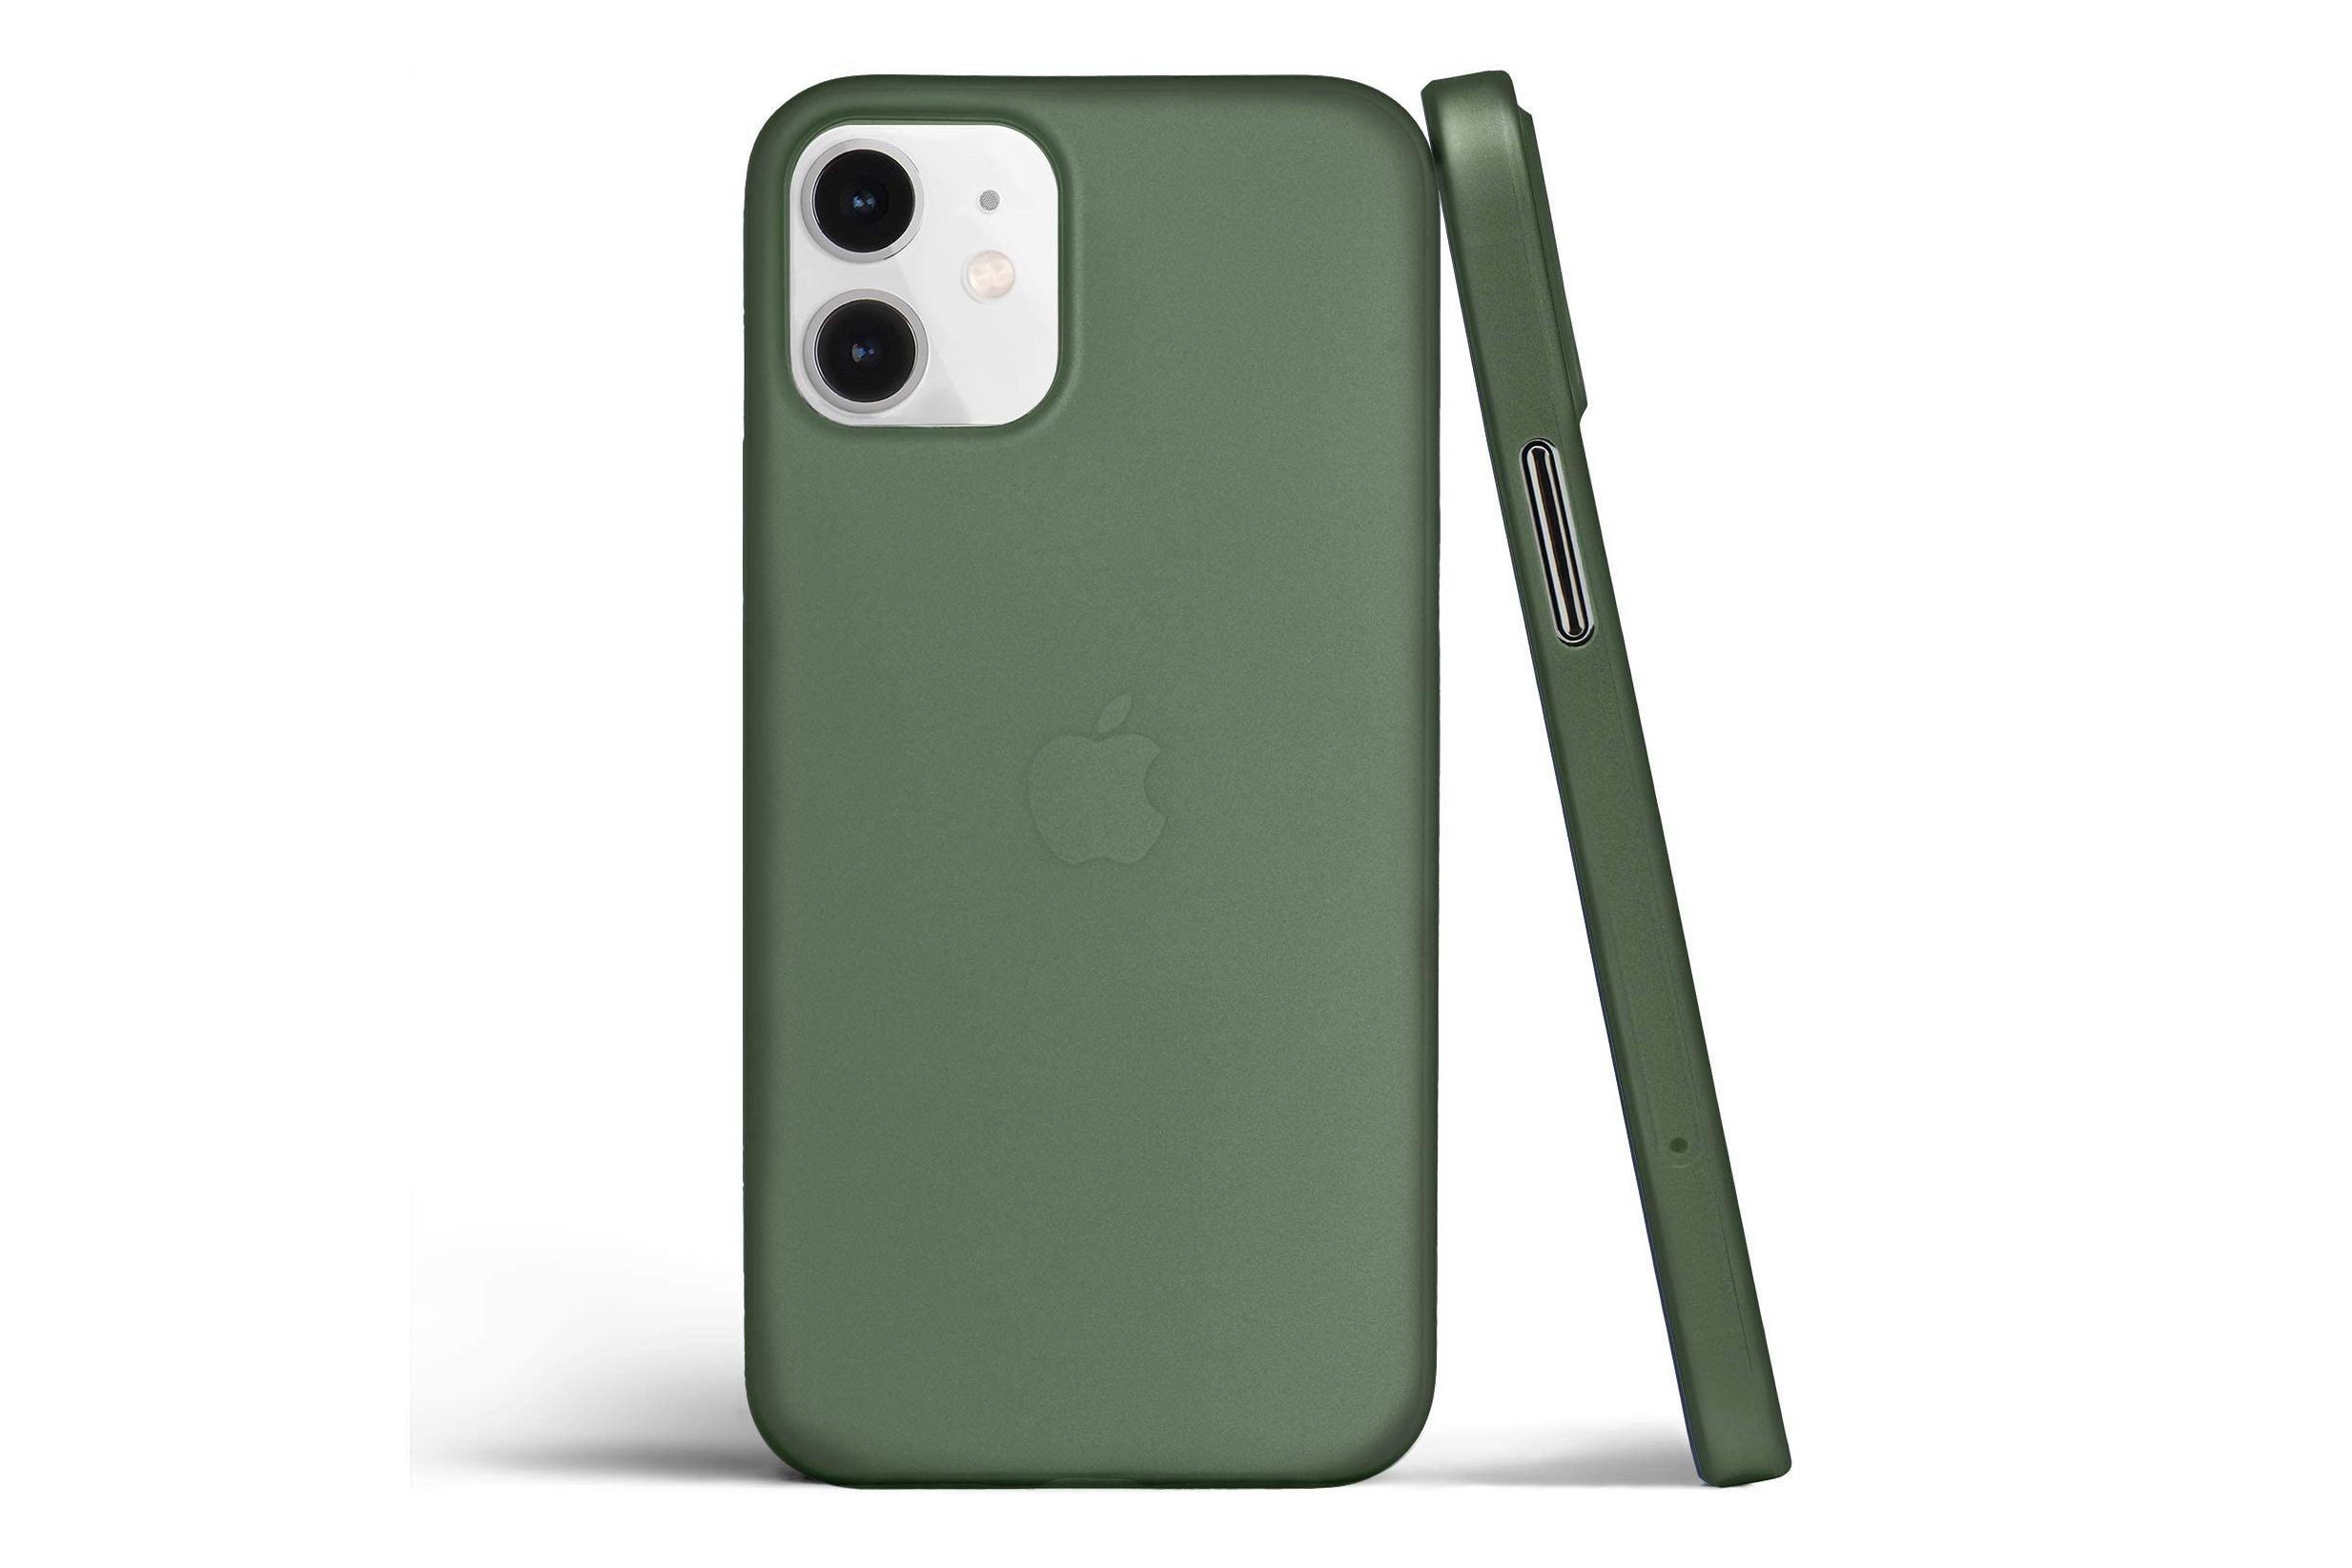 totallee Super Thin iPhone 12 mini case - The best iPhone 12 mini cases you can get - updated July 2022